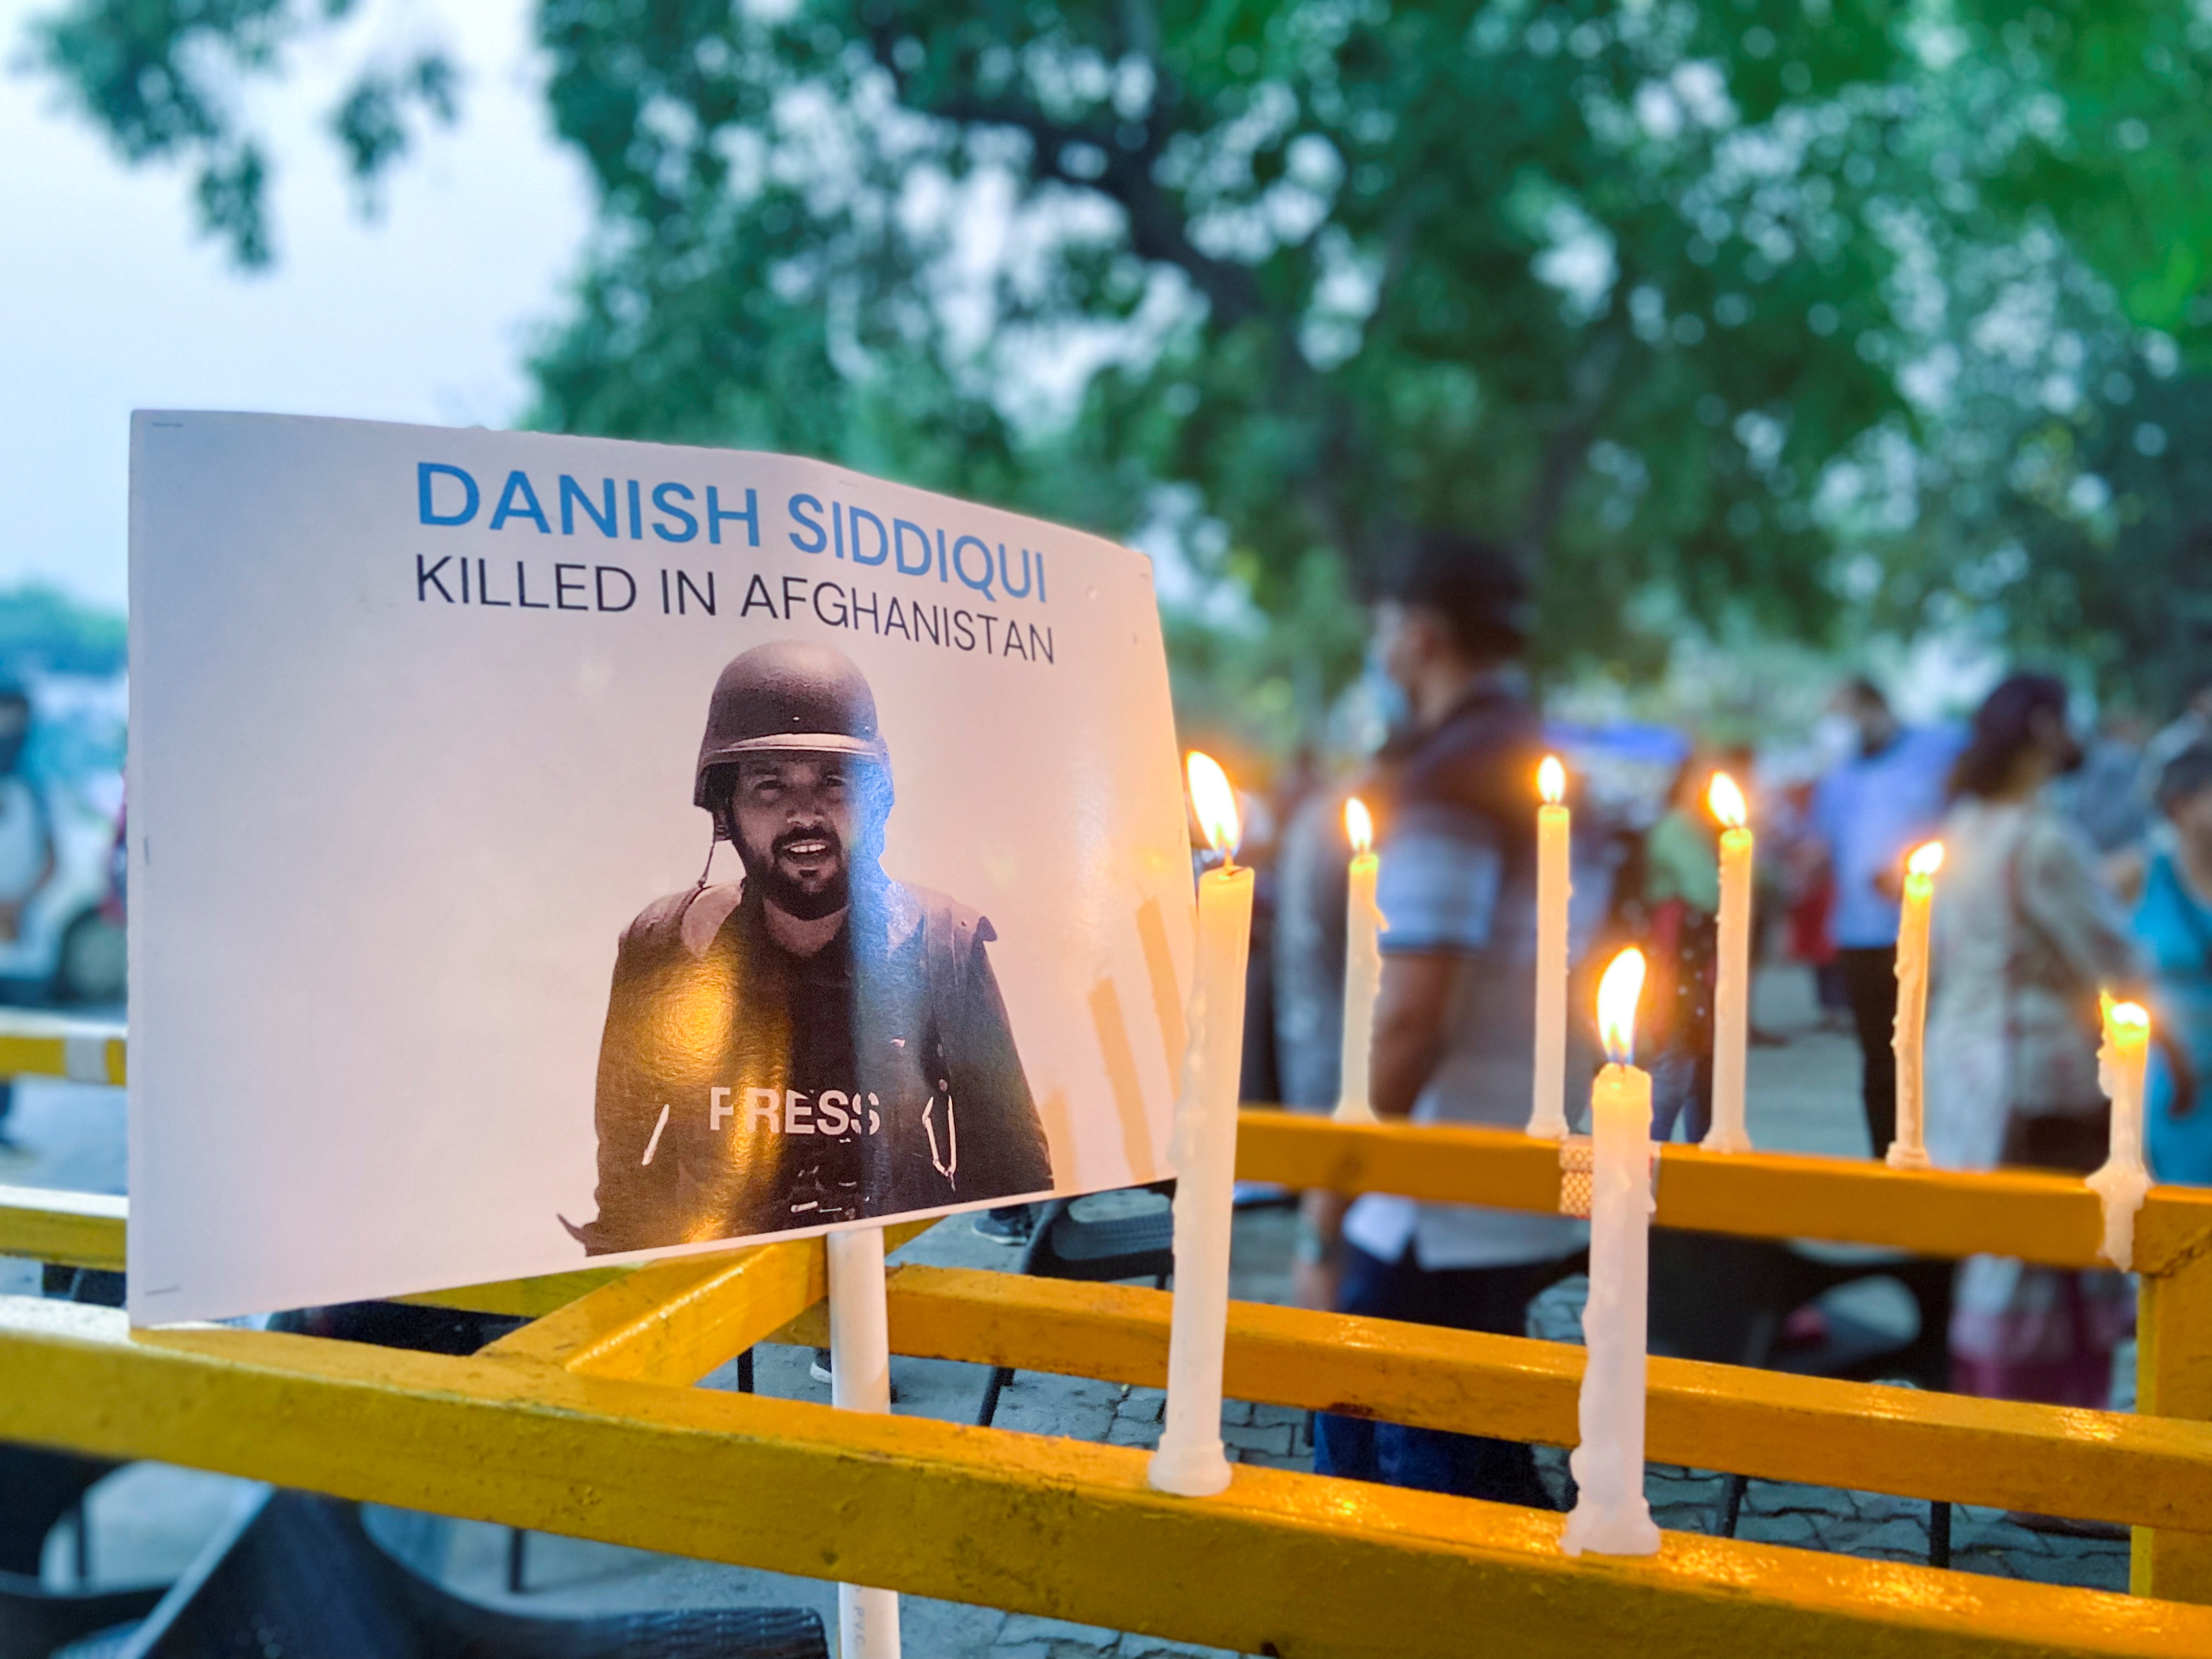 Candles are seen lit next to a photograph of Reuters journalist Danish Siddiqui after he was killed while covering a clash between Afghan security forces and Taliban fighters near a border crossing with Pakistan, outside Press Club in New Delhi